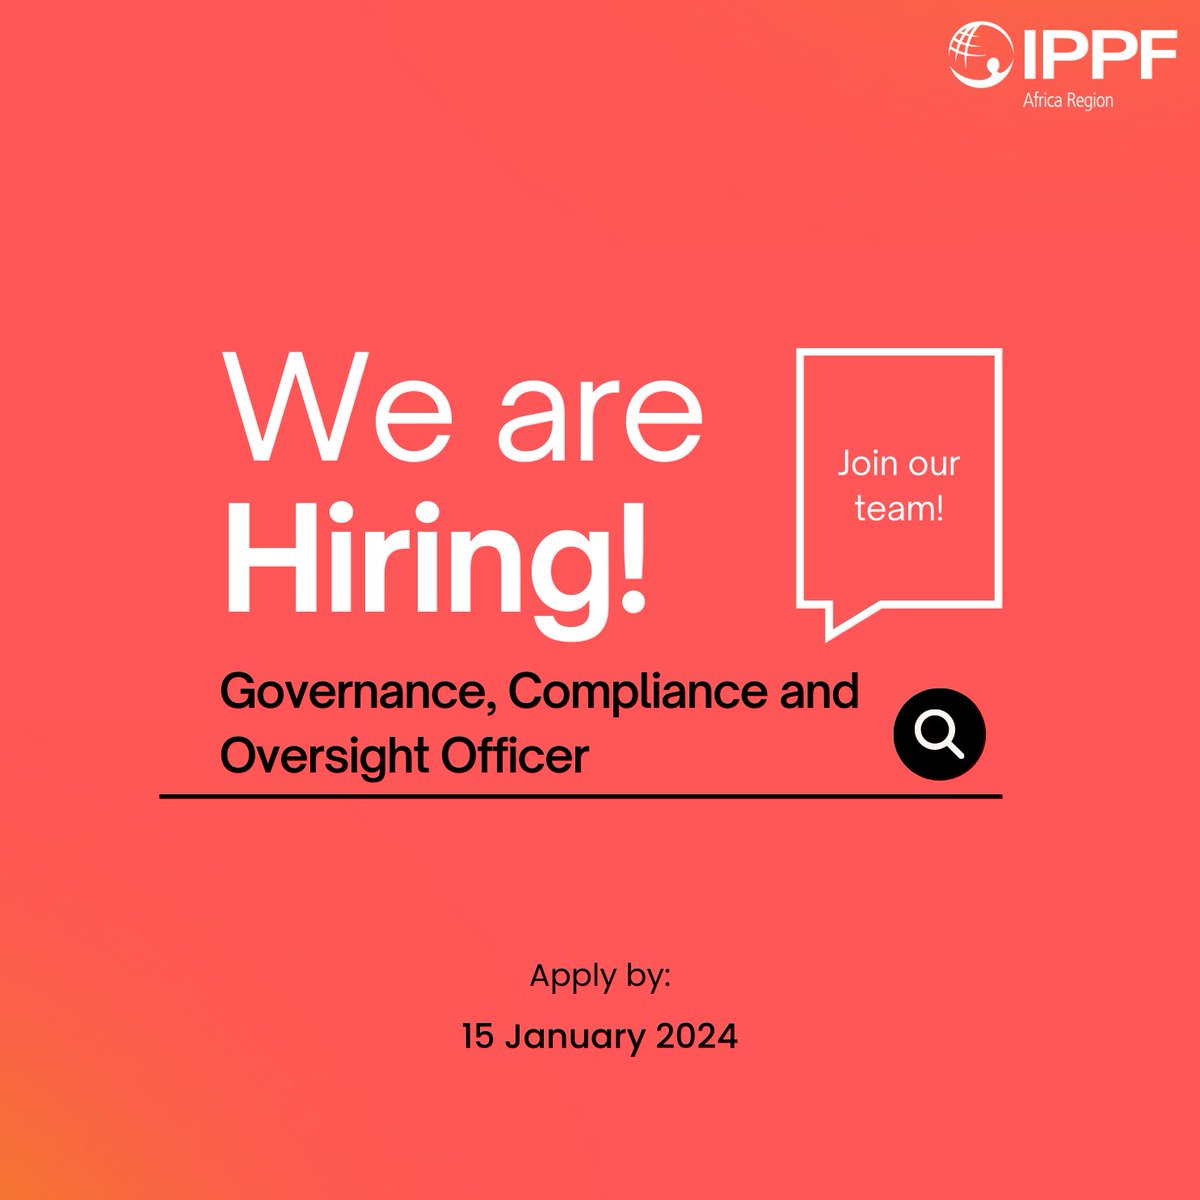 We're #hiring! Are you passionate about sexual/reproductive health rights? A new role is open for a Compliance & Oversight Officer at @IPPFAR. Support good governance + risk mgmt for member associations. 📅 Apply by 15/01/24! 👉africa.ippf.org/about-us/jobs-… @ippf @yamafrica